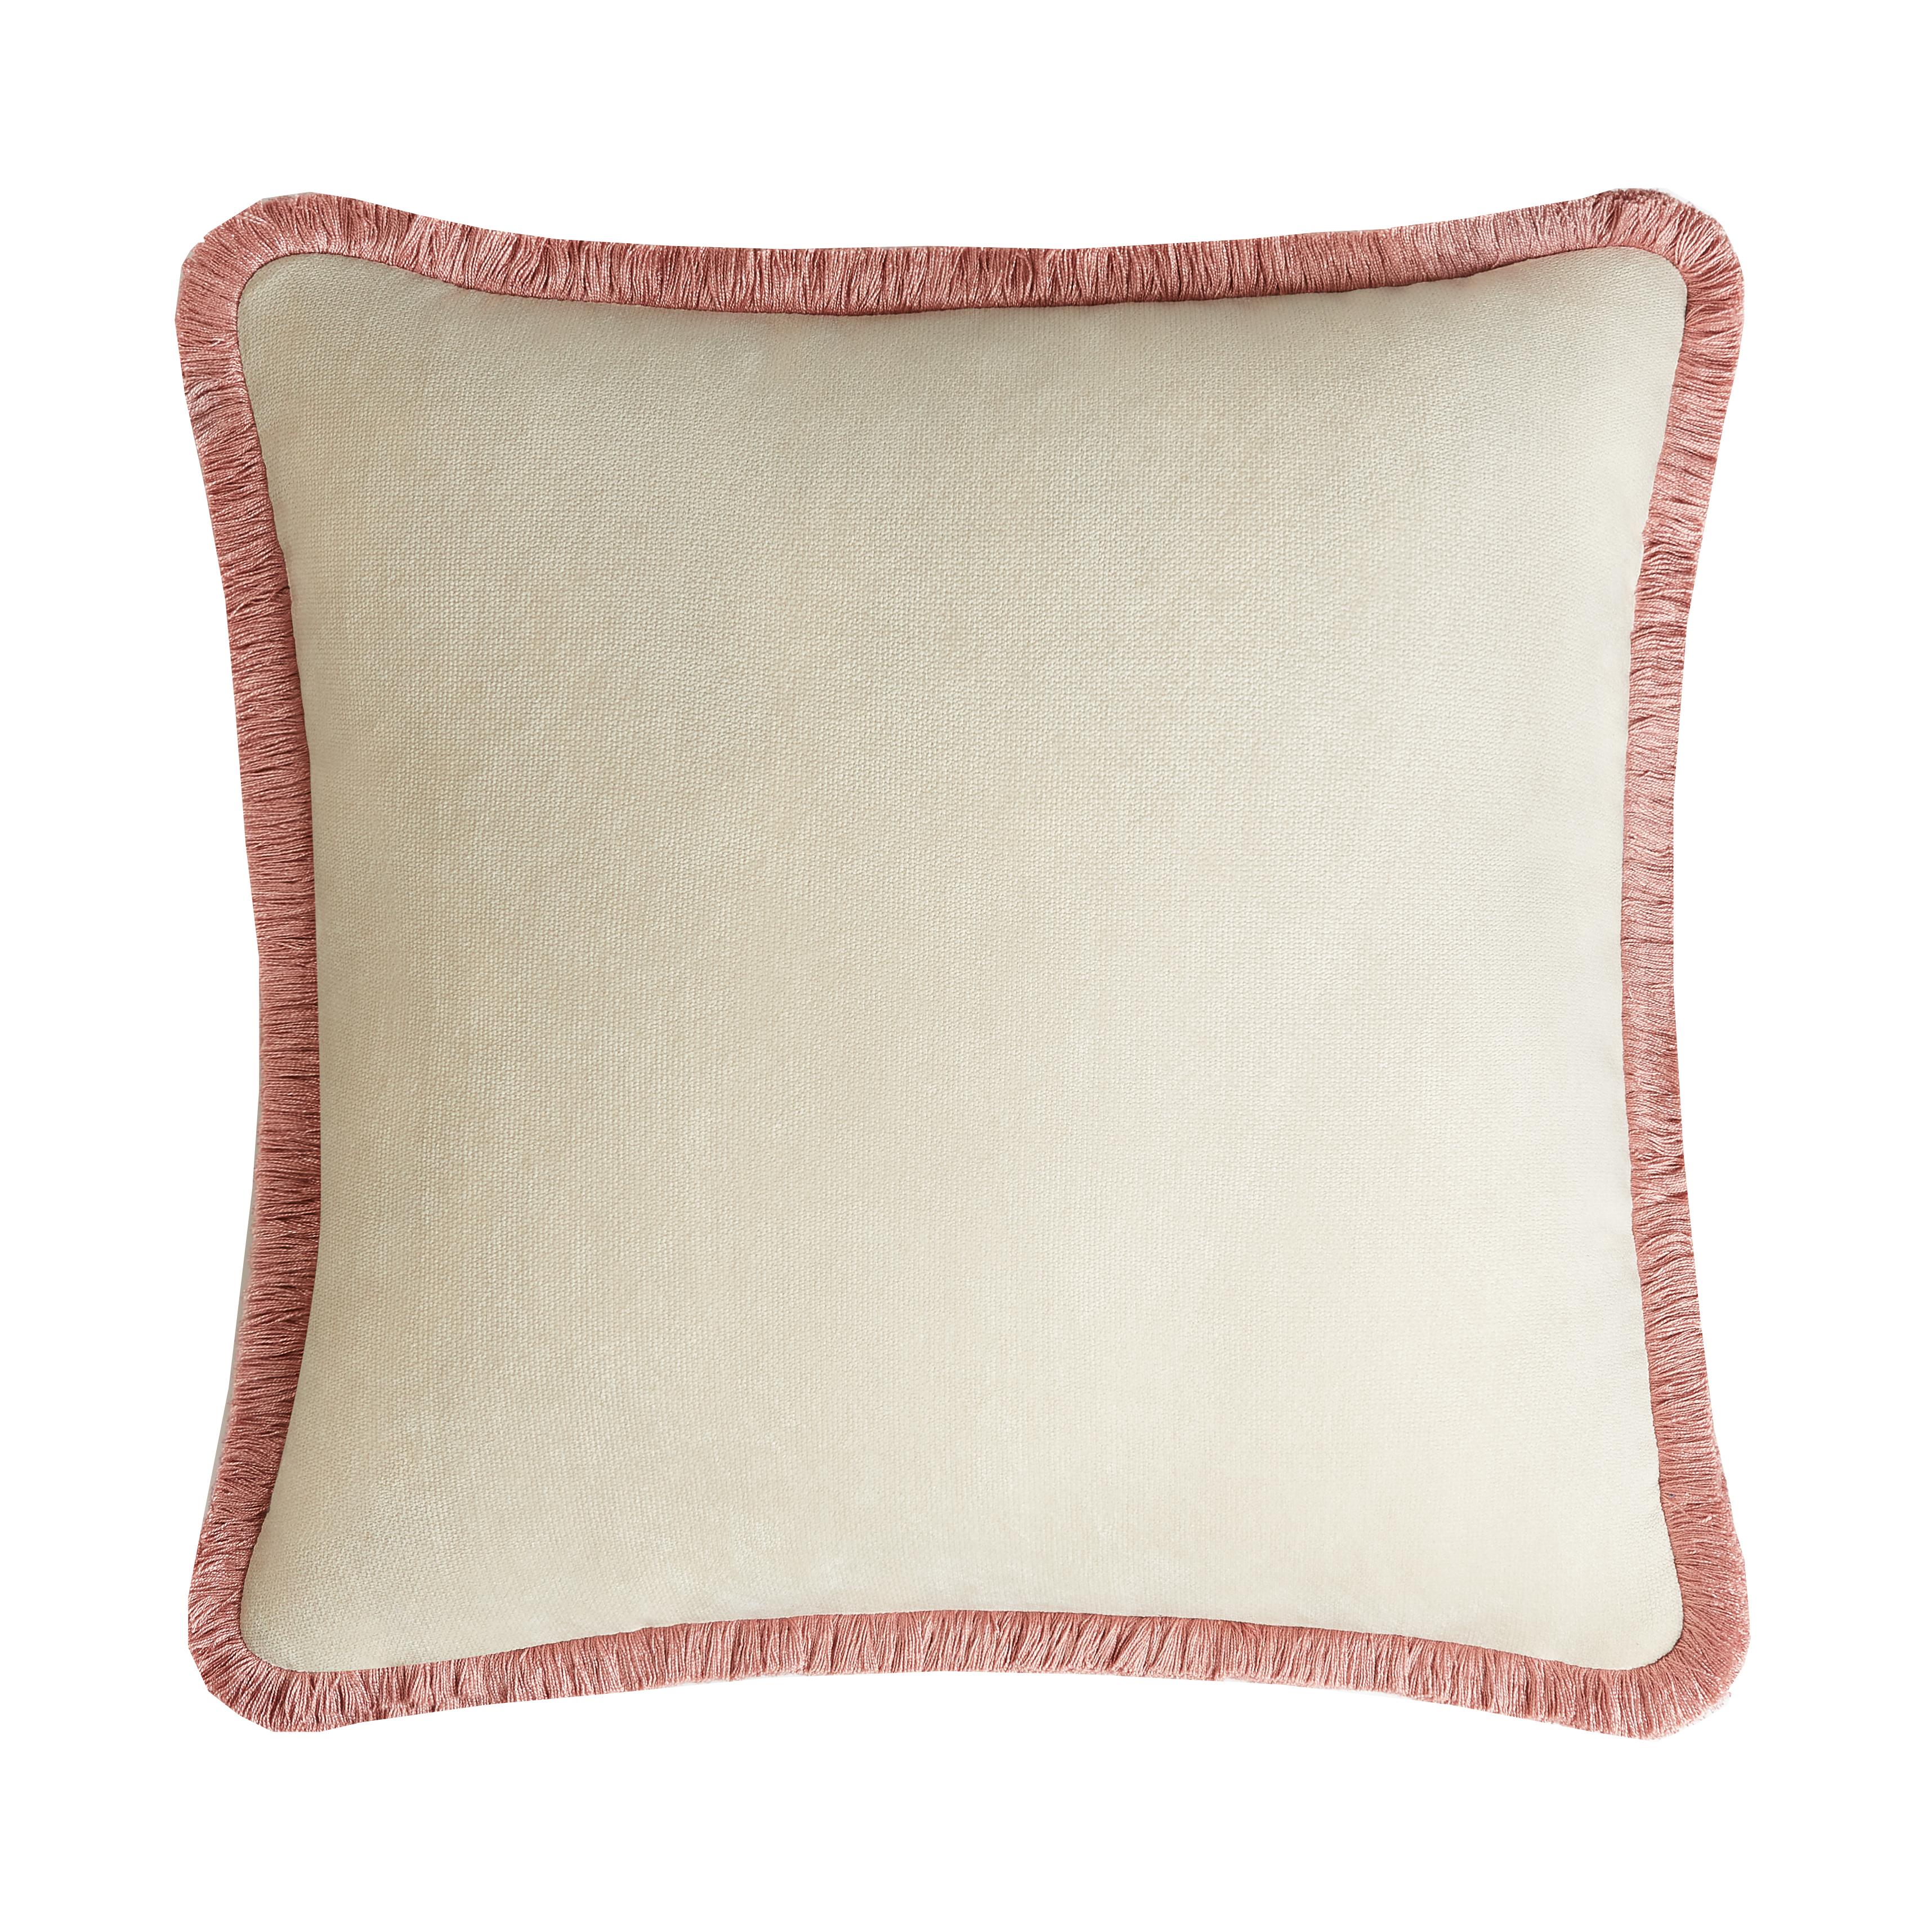 This exquisite square cushion will suit any decor with its neutral tones and refined allure. Padded with polyester fiber, the velvet removable cover boasts an elegant light pink color accented with a border of light pink trimming, resulting in an